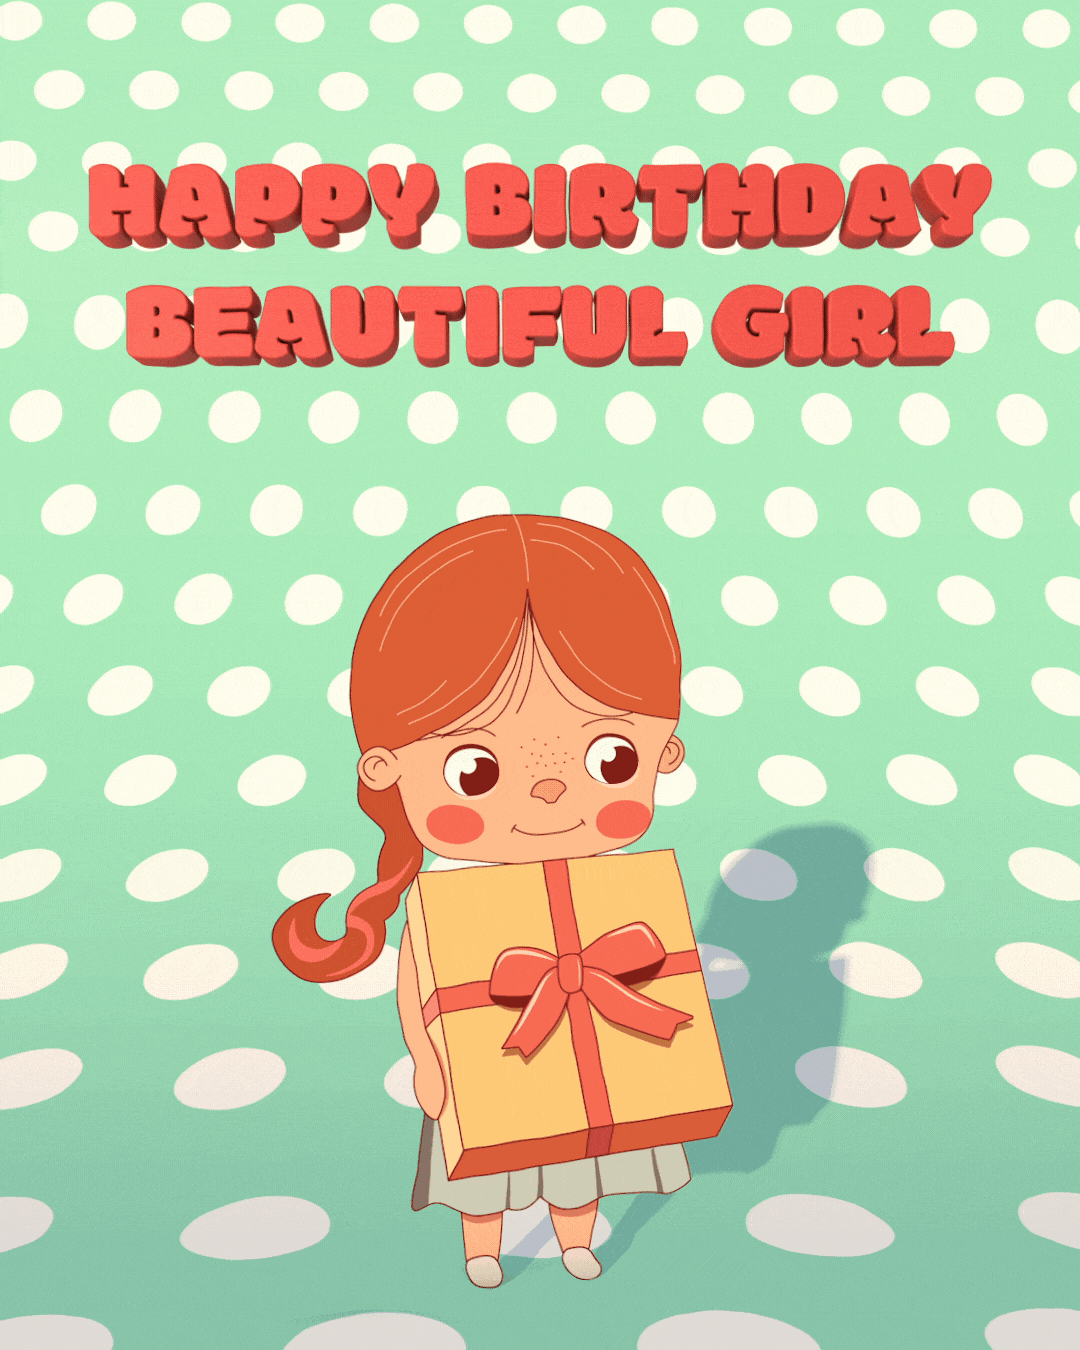 as wae recommends happy birthday pretty girl gif pic